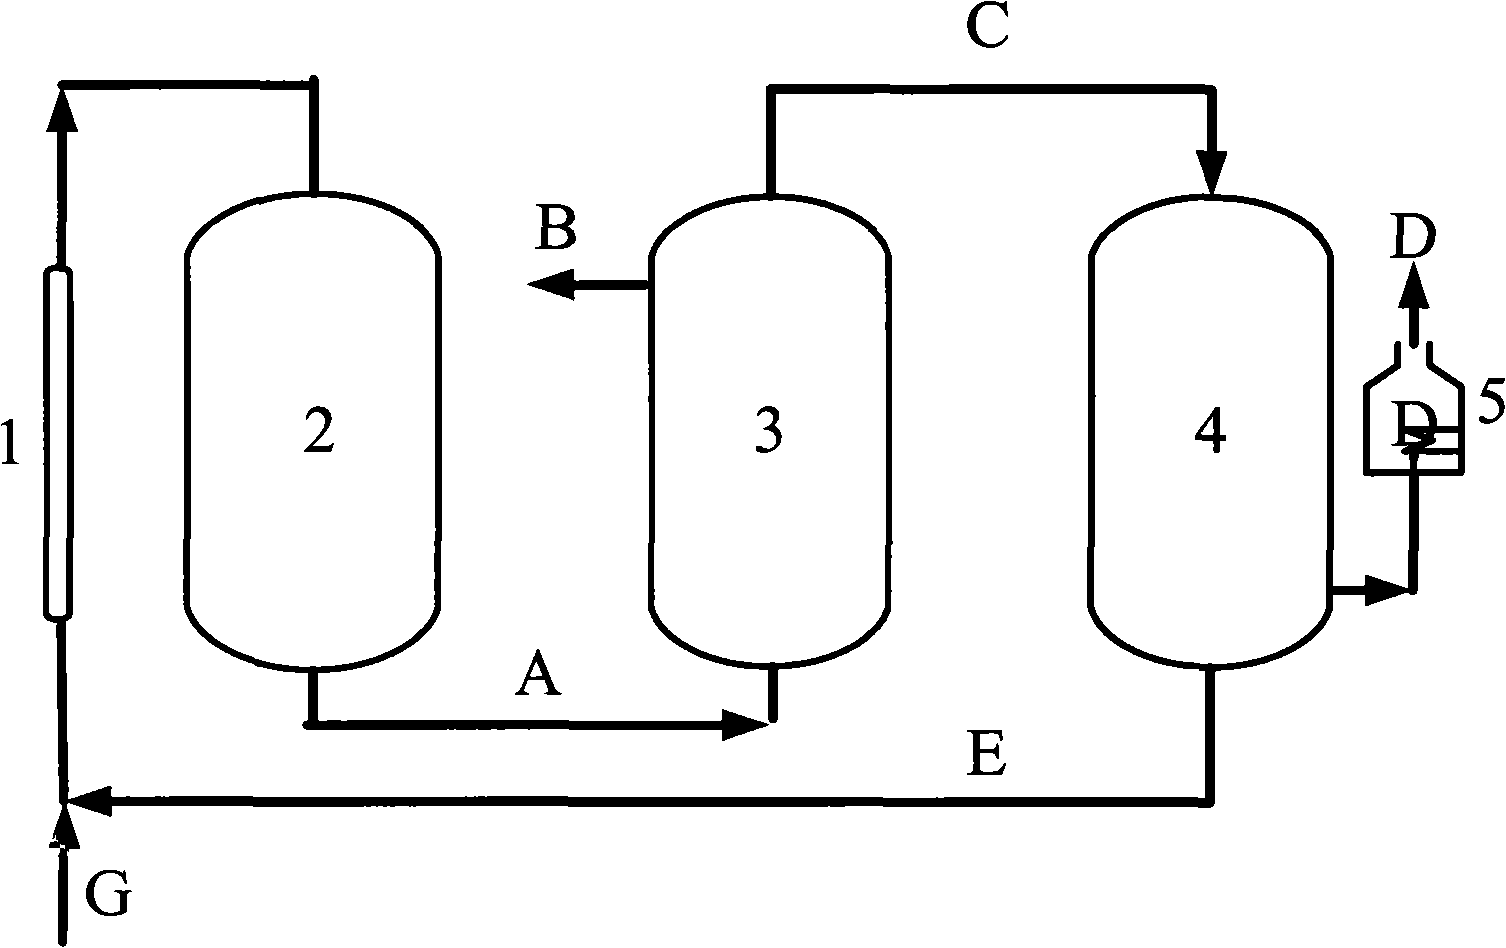 Process and device for preparing H2 and CO by co-transformation of CH4 and CO2